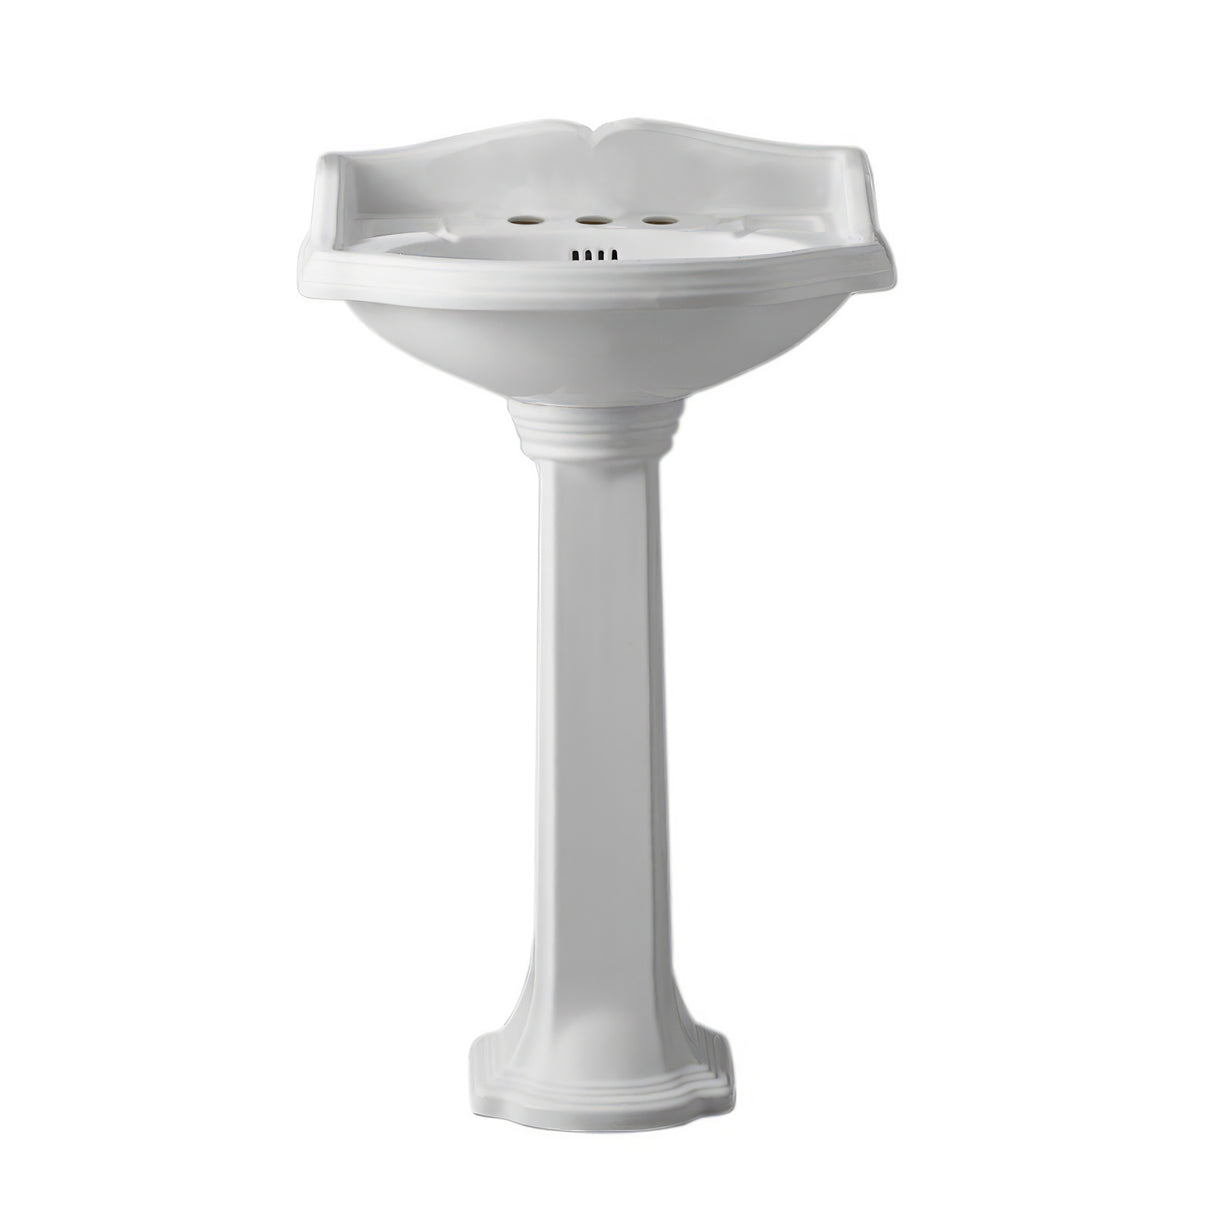 Isabella Collection Traditional Pedestal with an Integrated small oval bowl, widespread Faucet Drilling,Backsplash, Dual Soap Ledges, Decorative Trim and Overflow